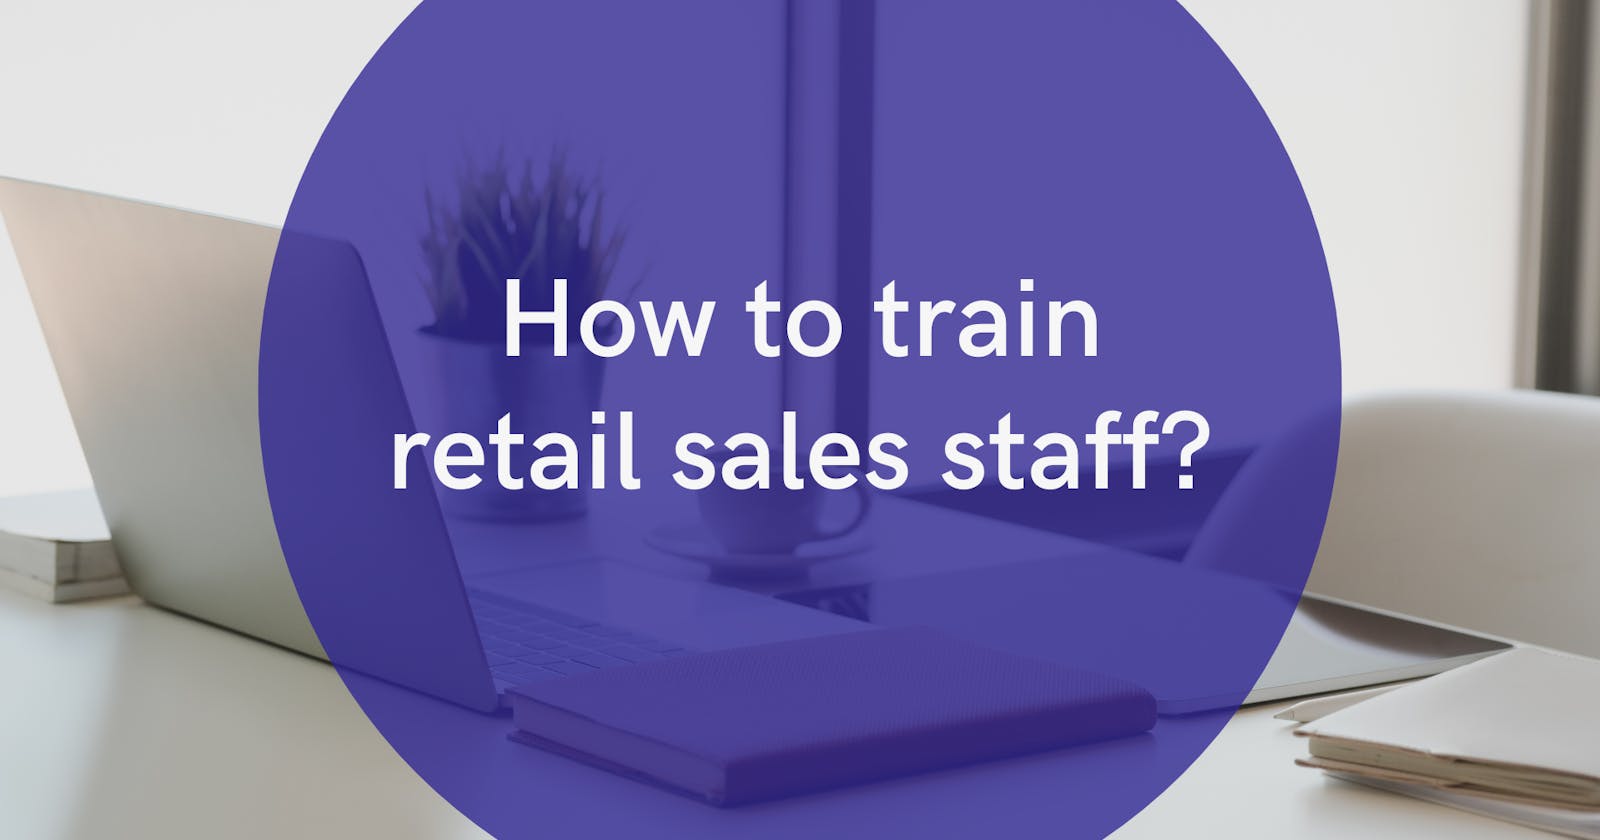 How to train retail sales staff?